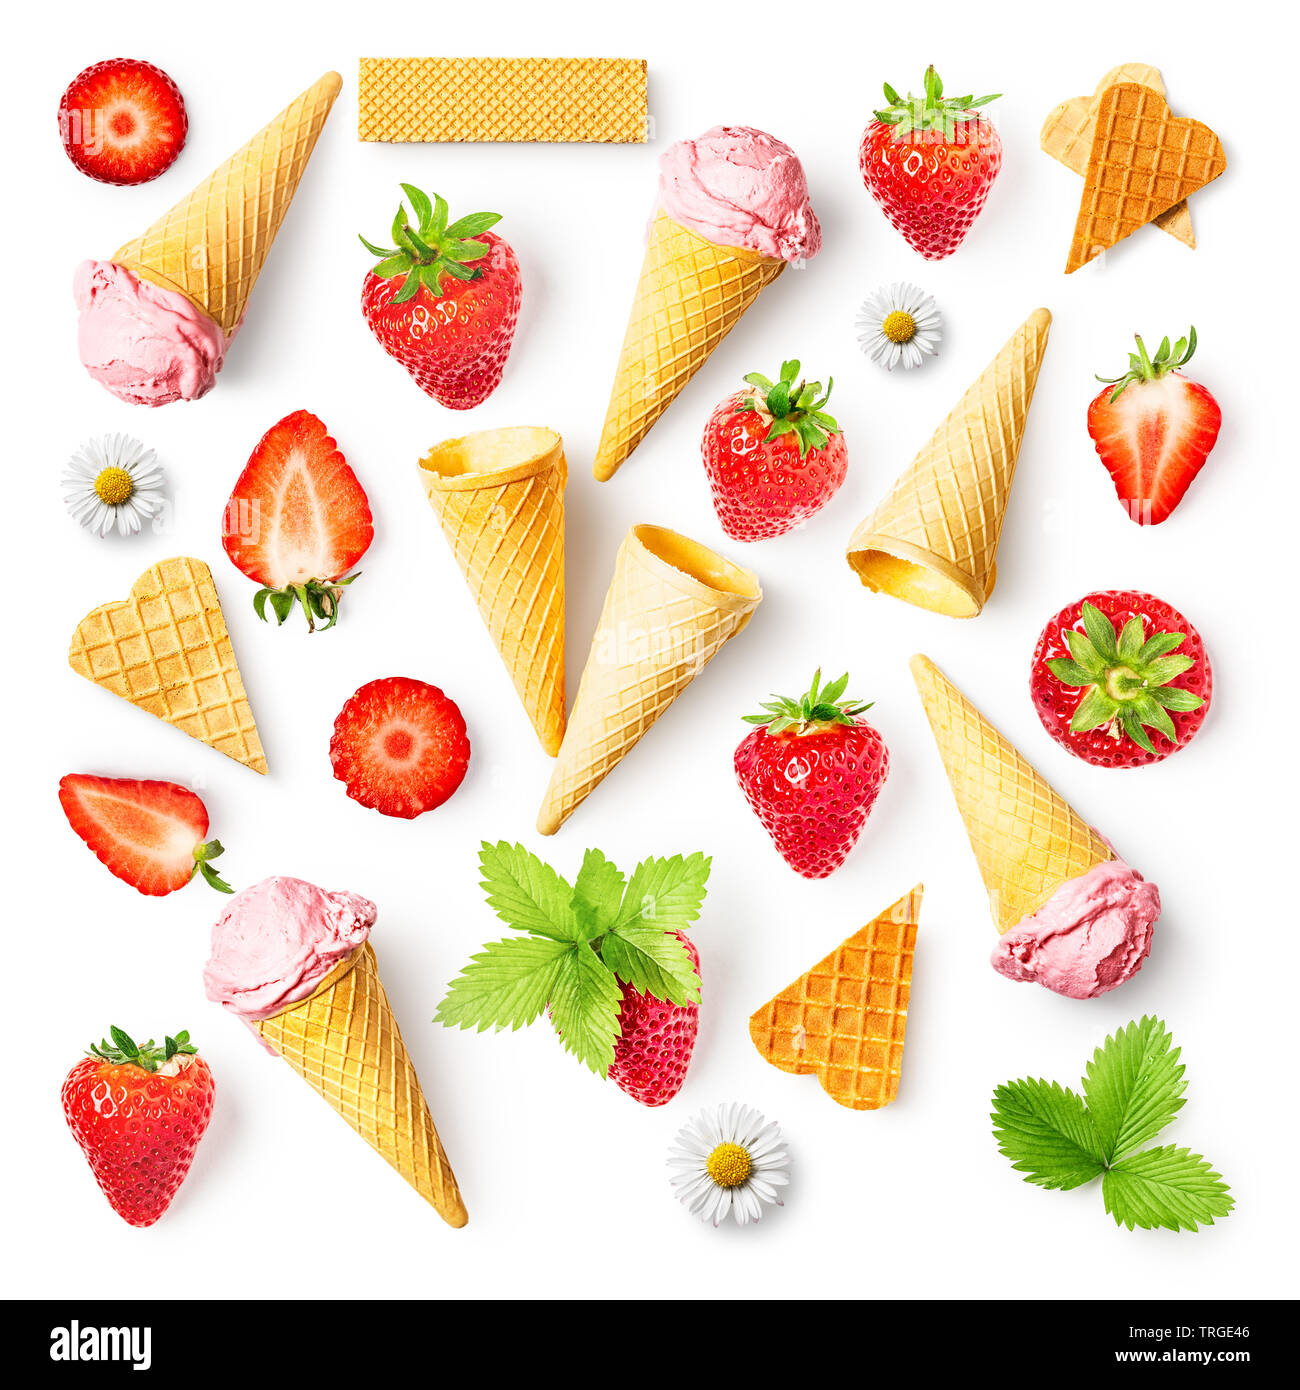 Fresh strawberries and strawberry ice cream with waffle cone collection isolated on white background. Healthy eating and dieting concept. Spring fruit Stock Photo